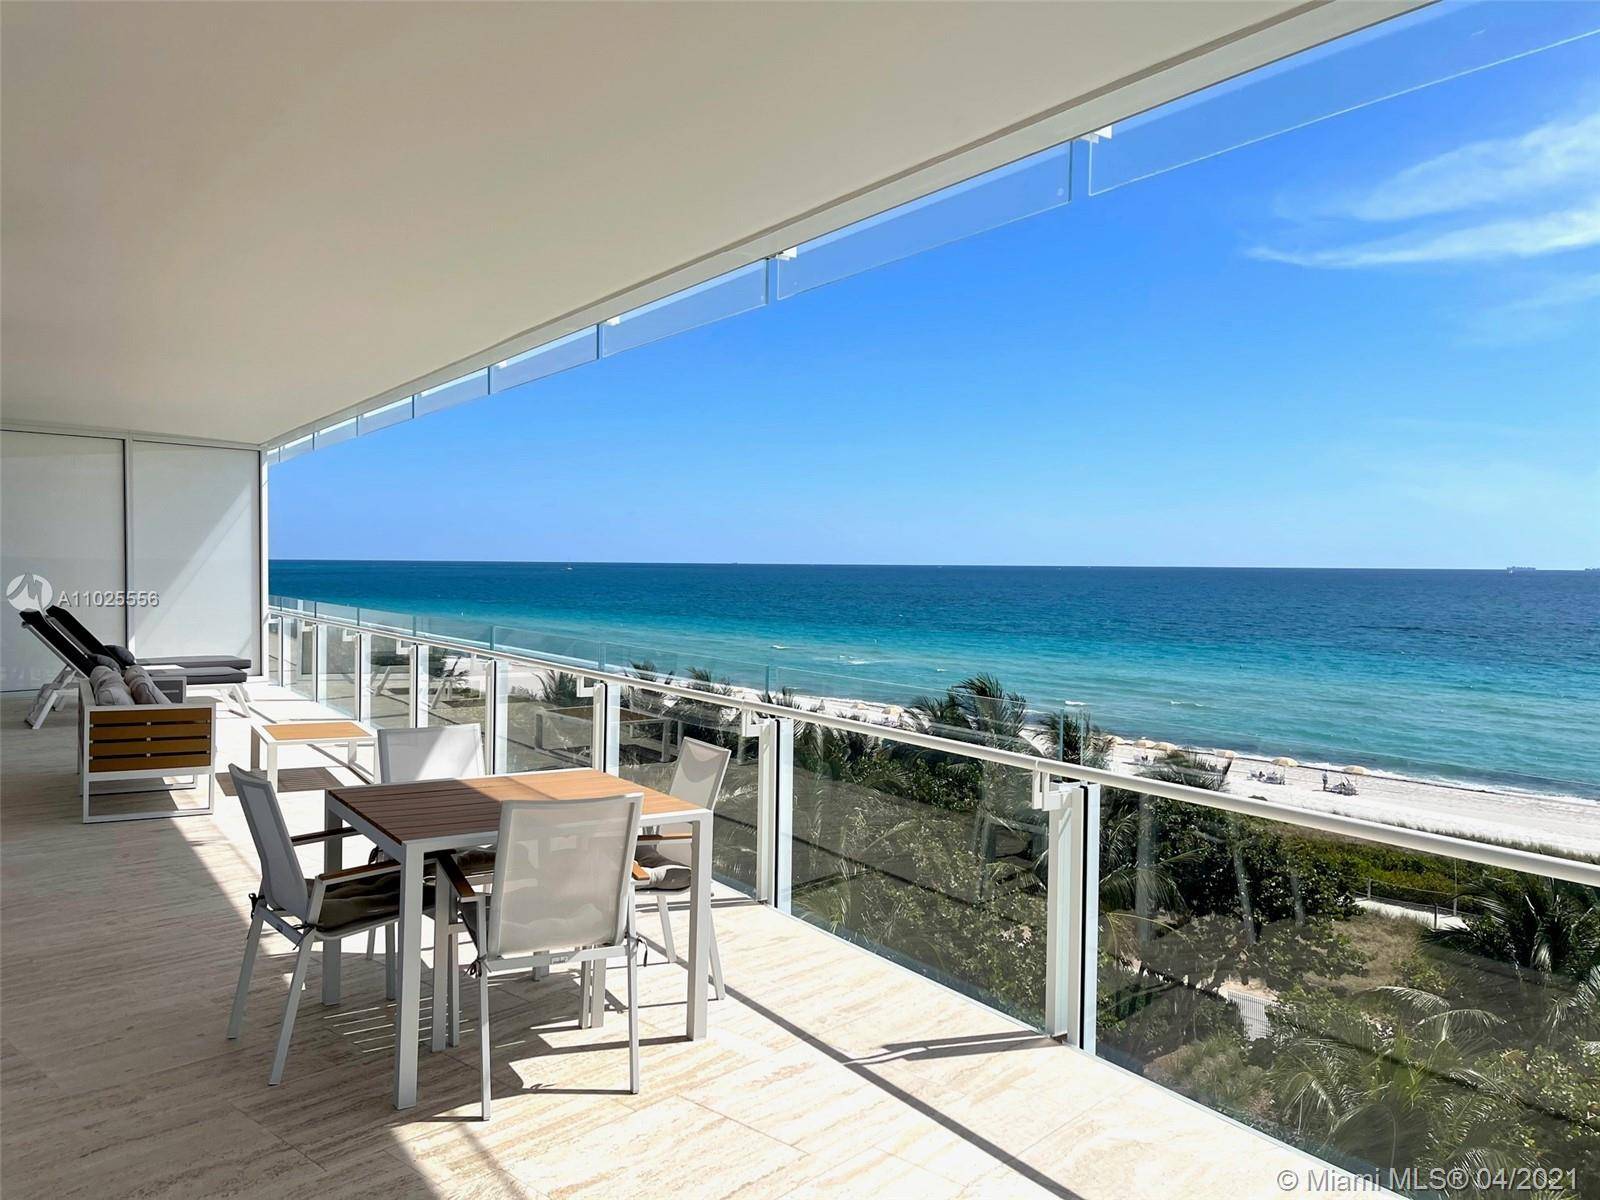 Full Service Building Designed by Pritzker Prize winning architect Richard Meier, this Surf Club Four Seasons residence boasts a total living area of 3, 409 sq ft.